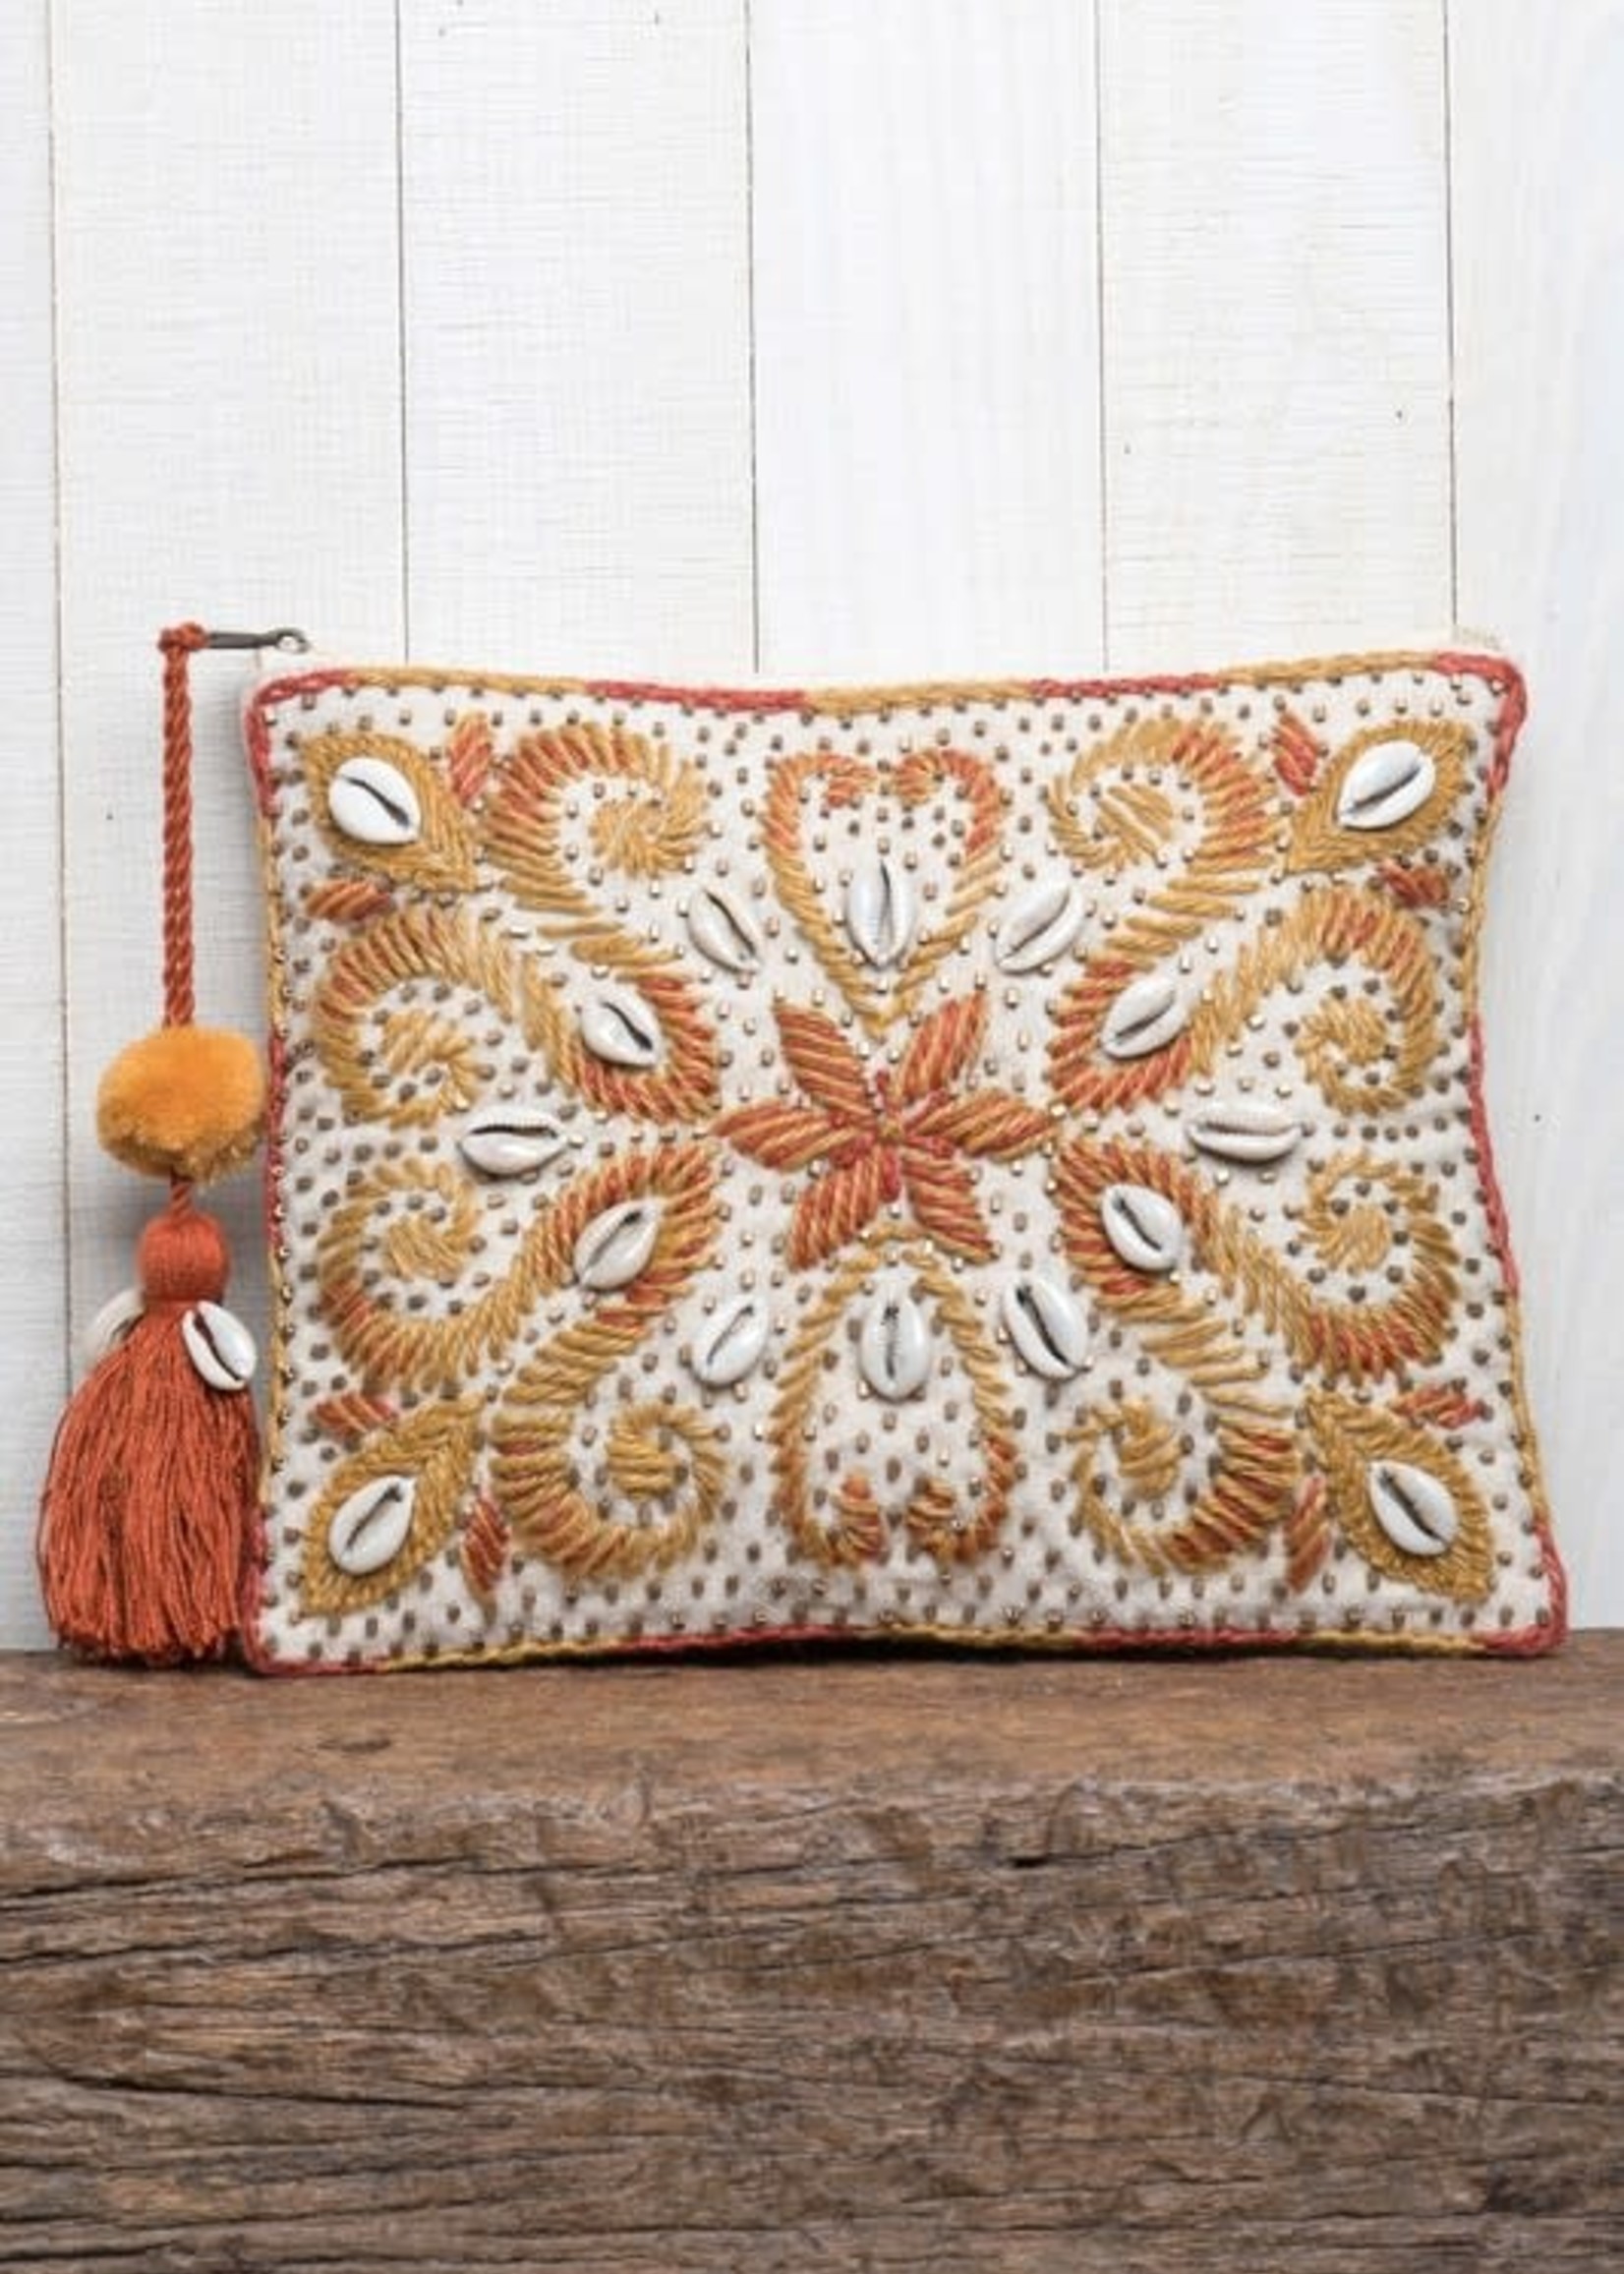 Hand Embroidered Shell Throw Clutch